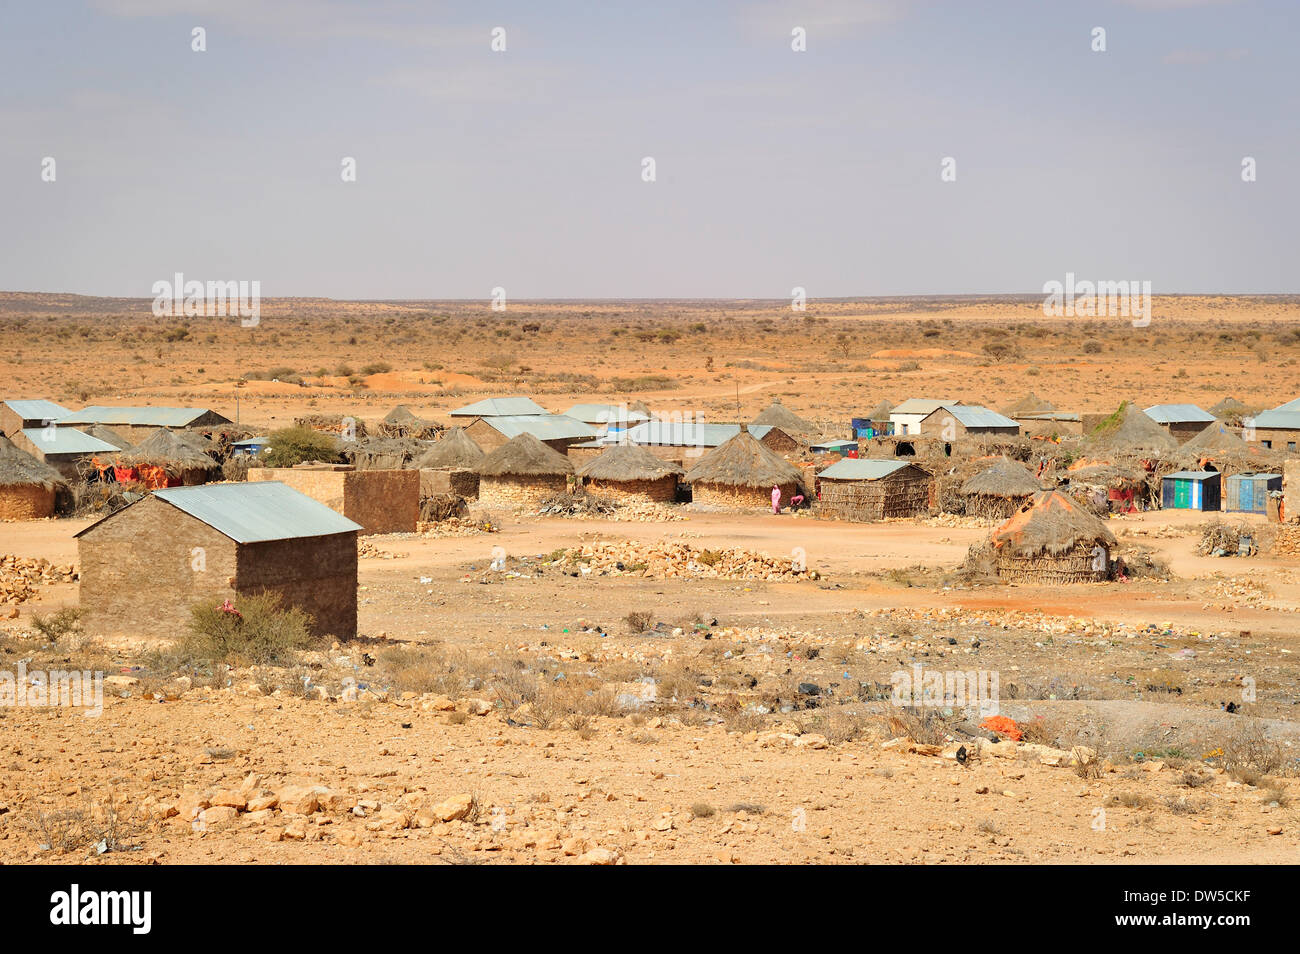 puntland-has-a-semi-arid-climate-rainfall-is-sparse-and-variable-with-DW5CKF.jpg